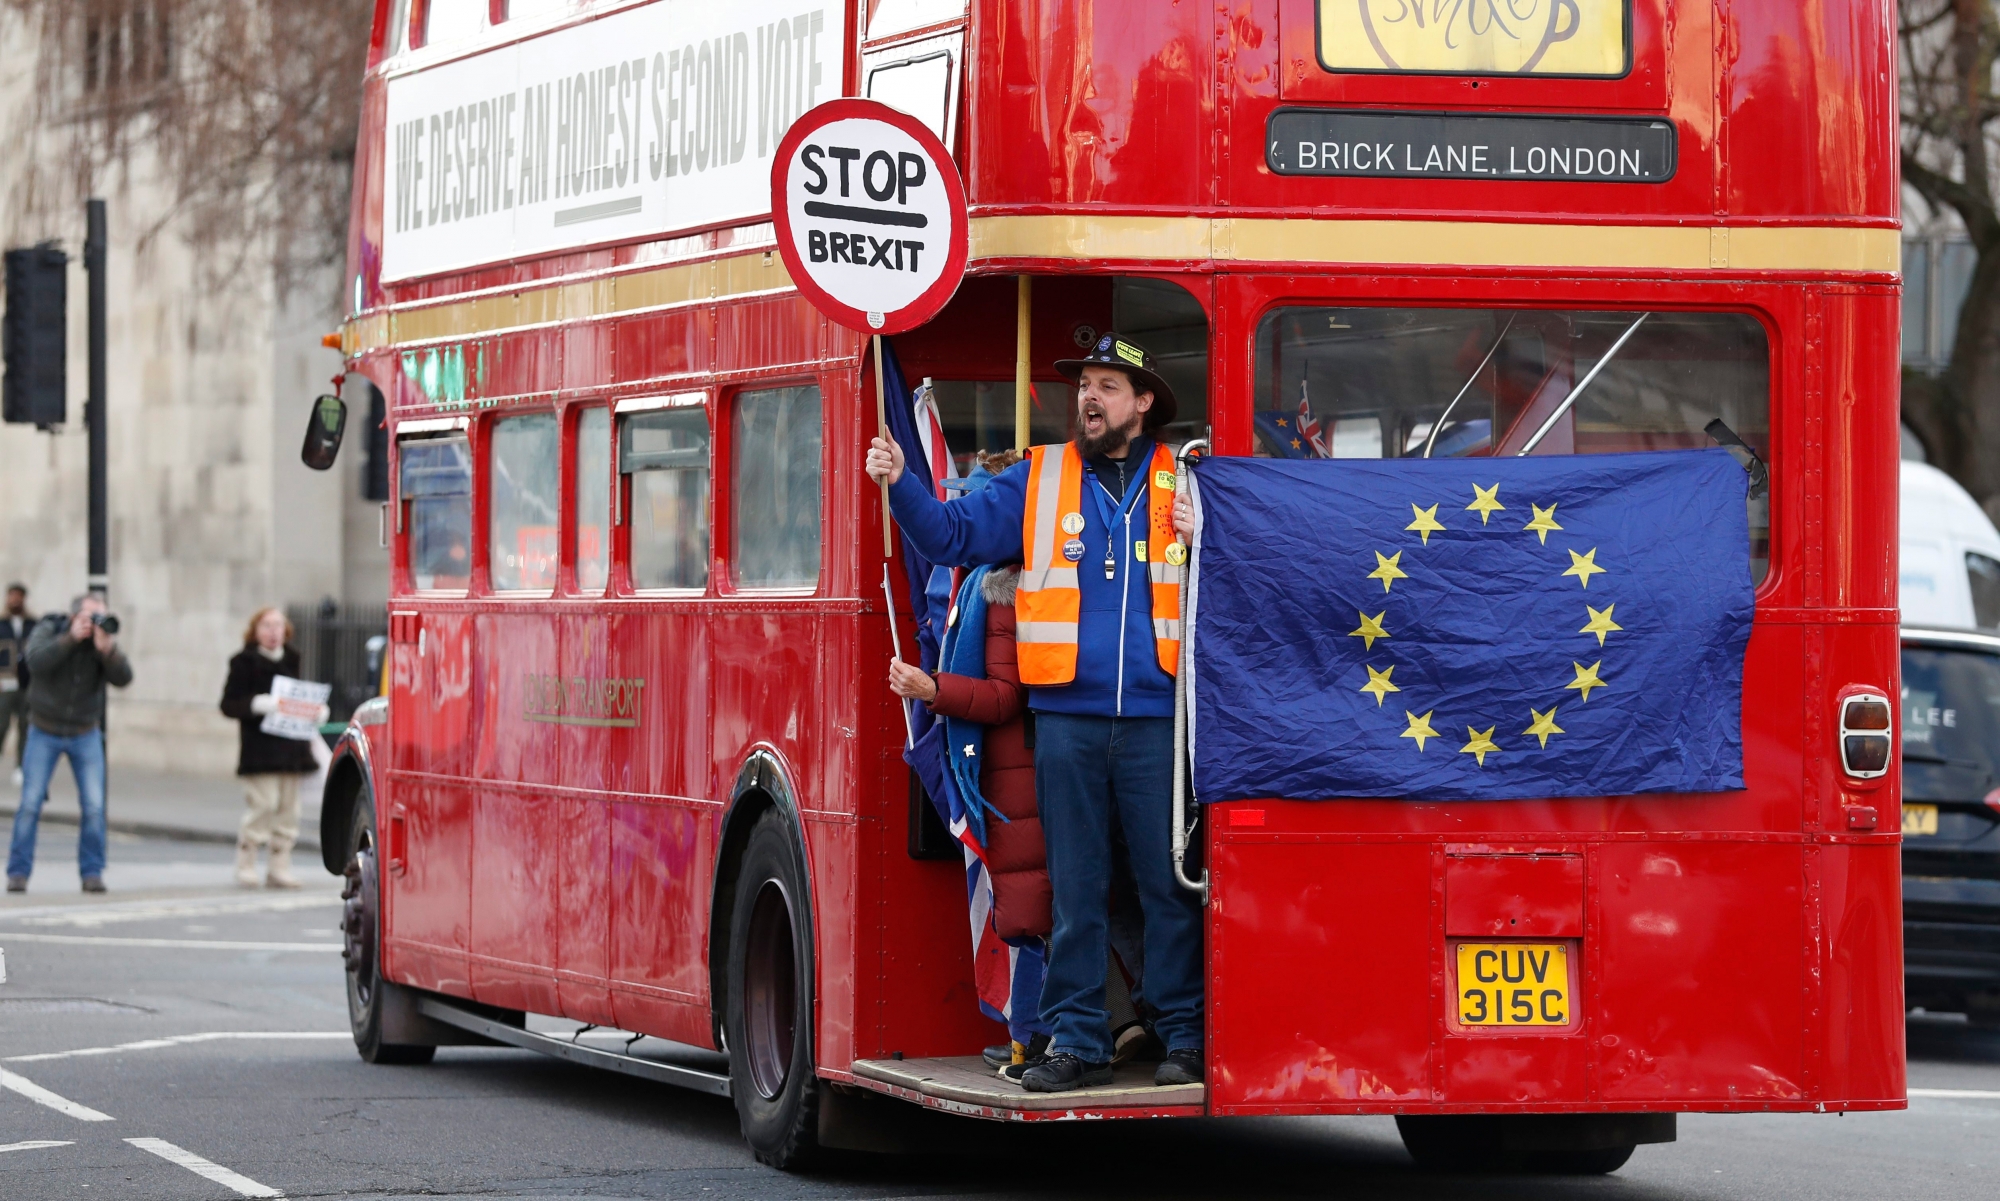 Anti Brexit protesters on board a hired red London bus demonstrate as they drive past the Houses of Parliament in London, Monday, Jan. 28, 2019. Pro-Brexit British lawmakers were mounting a campaign Monday to rescue May's rejected European Union divorce deal in a parliamentary showdown this week. (AP Photo/Alastair Grant) Britain Brexit